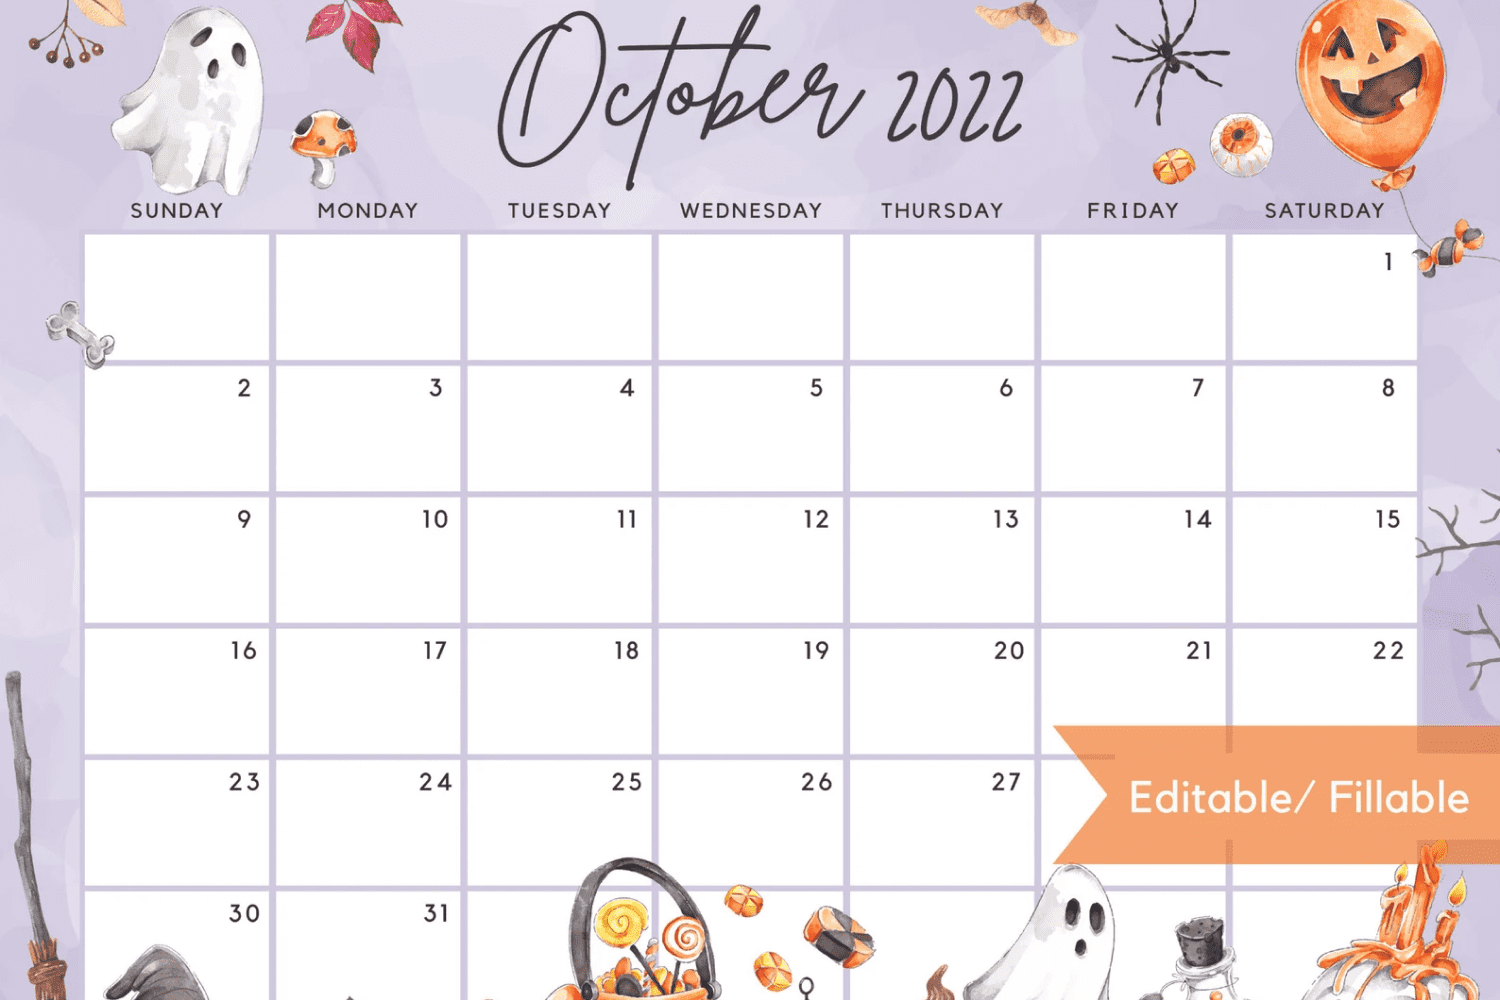 Calendar for October with the ability to make entries with ghosts, balloons and mushrooms.